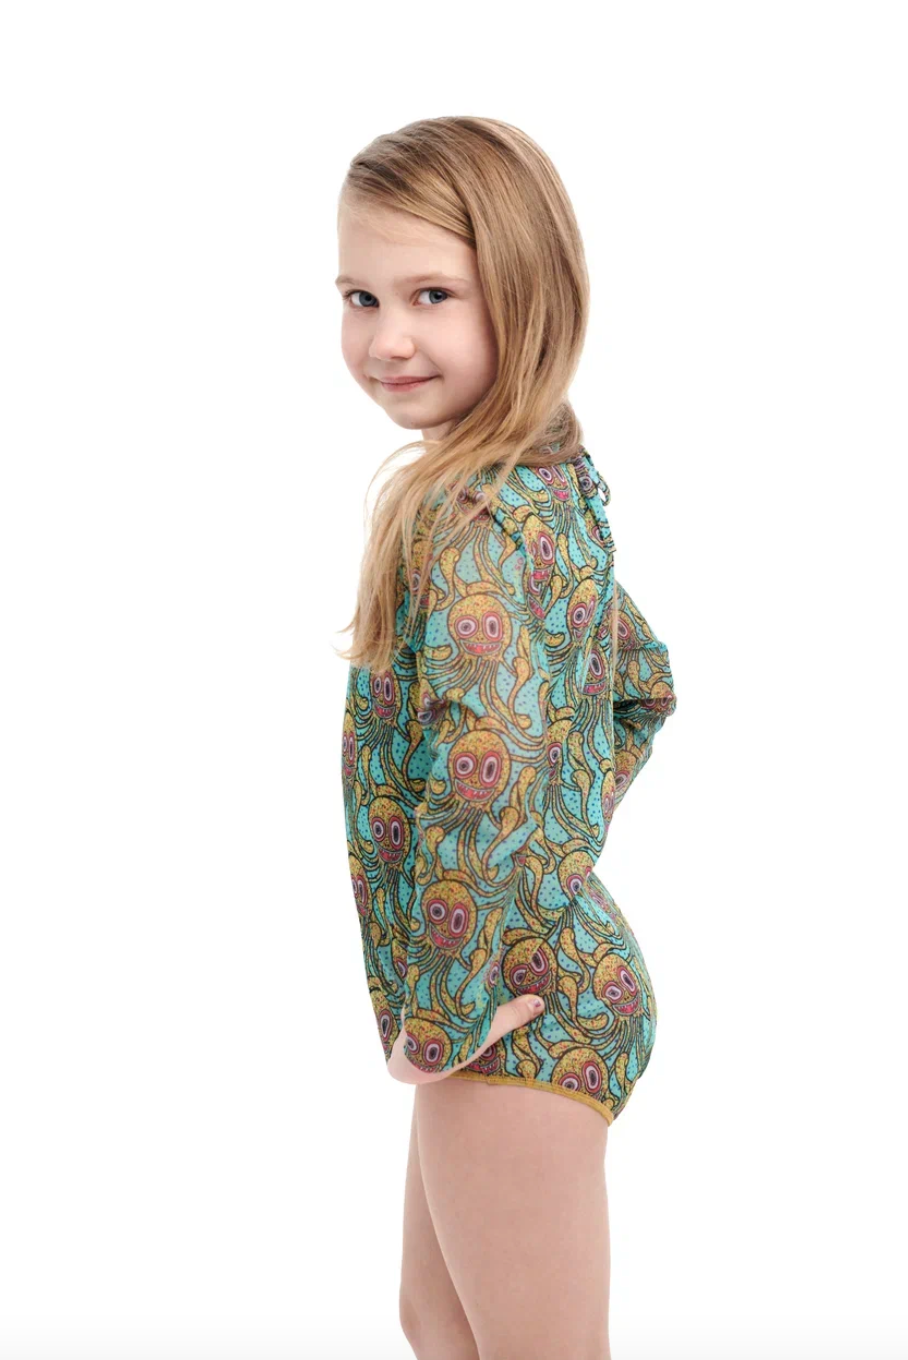 Explore our Octopus print kids swimsuits with sleeves, offering SPF35 protection. Designed for classic luxury and safety, these eco-friendly swimsuits ensure your child enjoys stylish and secure beachwear. Shop now!